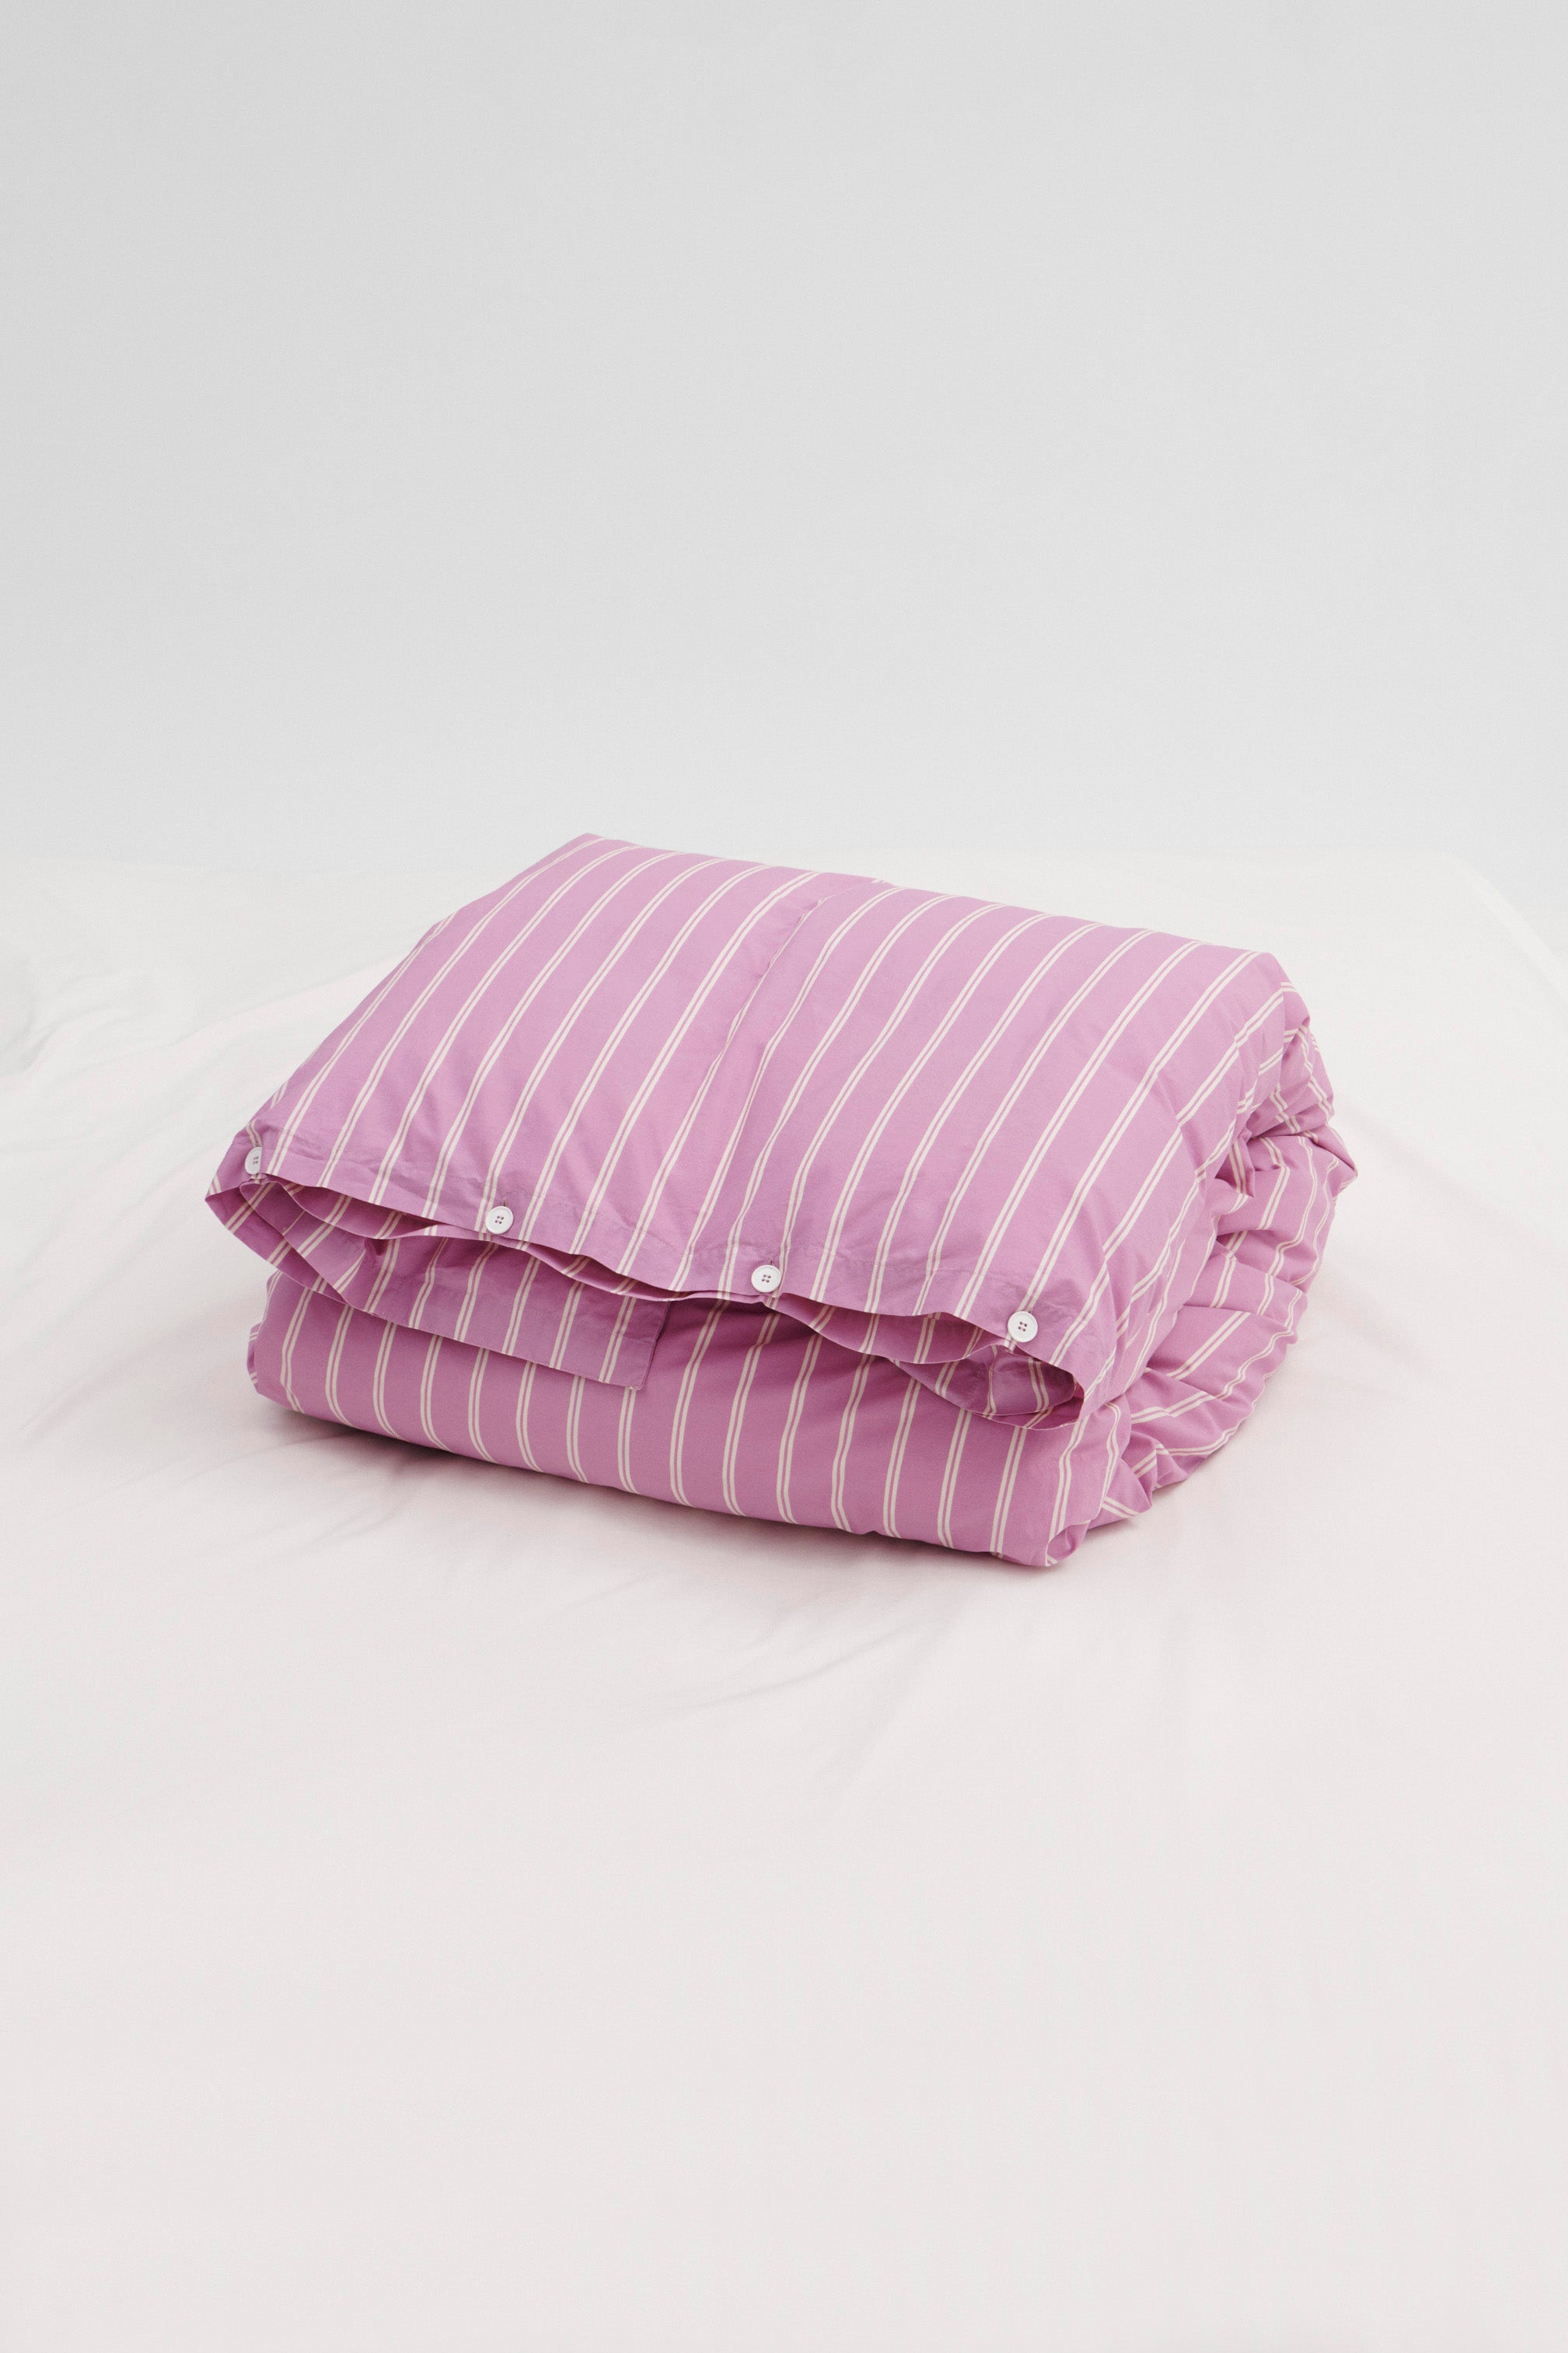 Percale Double Duvet Cover Mallow Pink Stripes